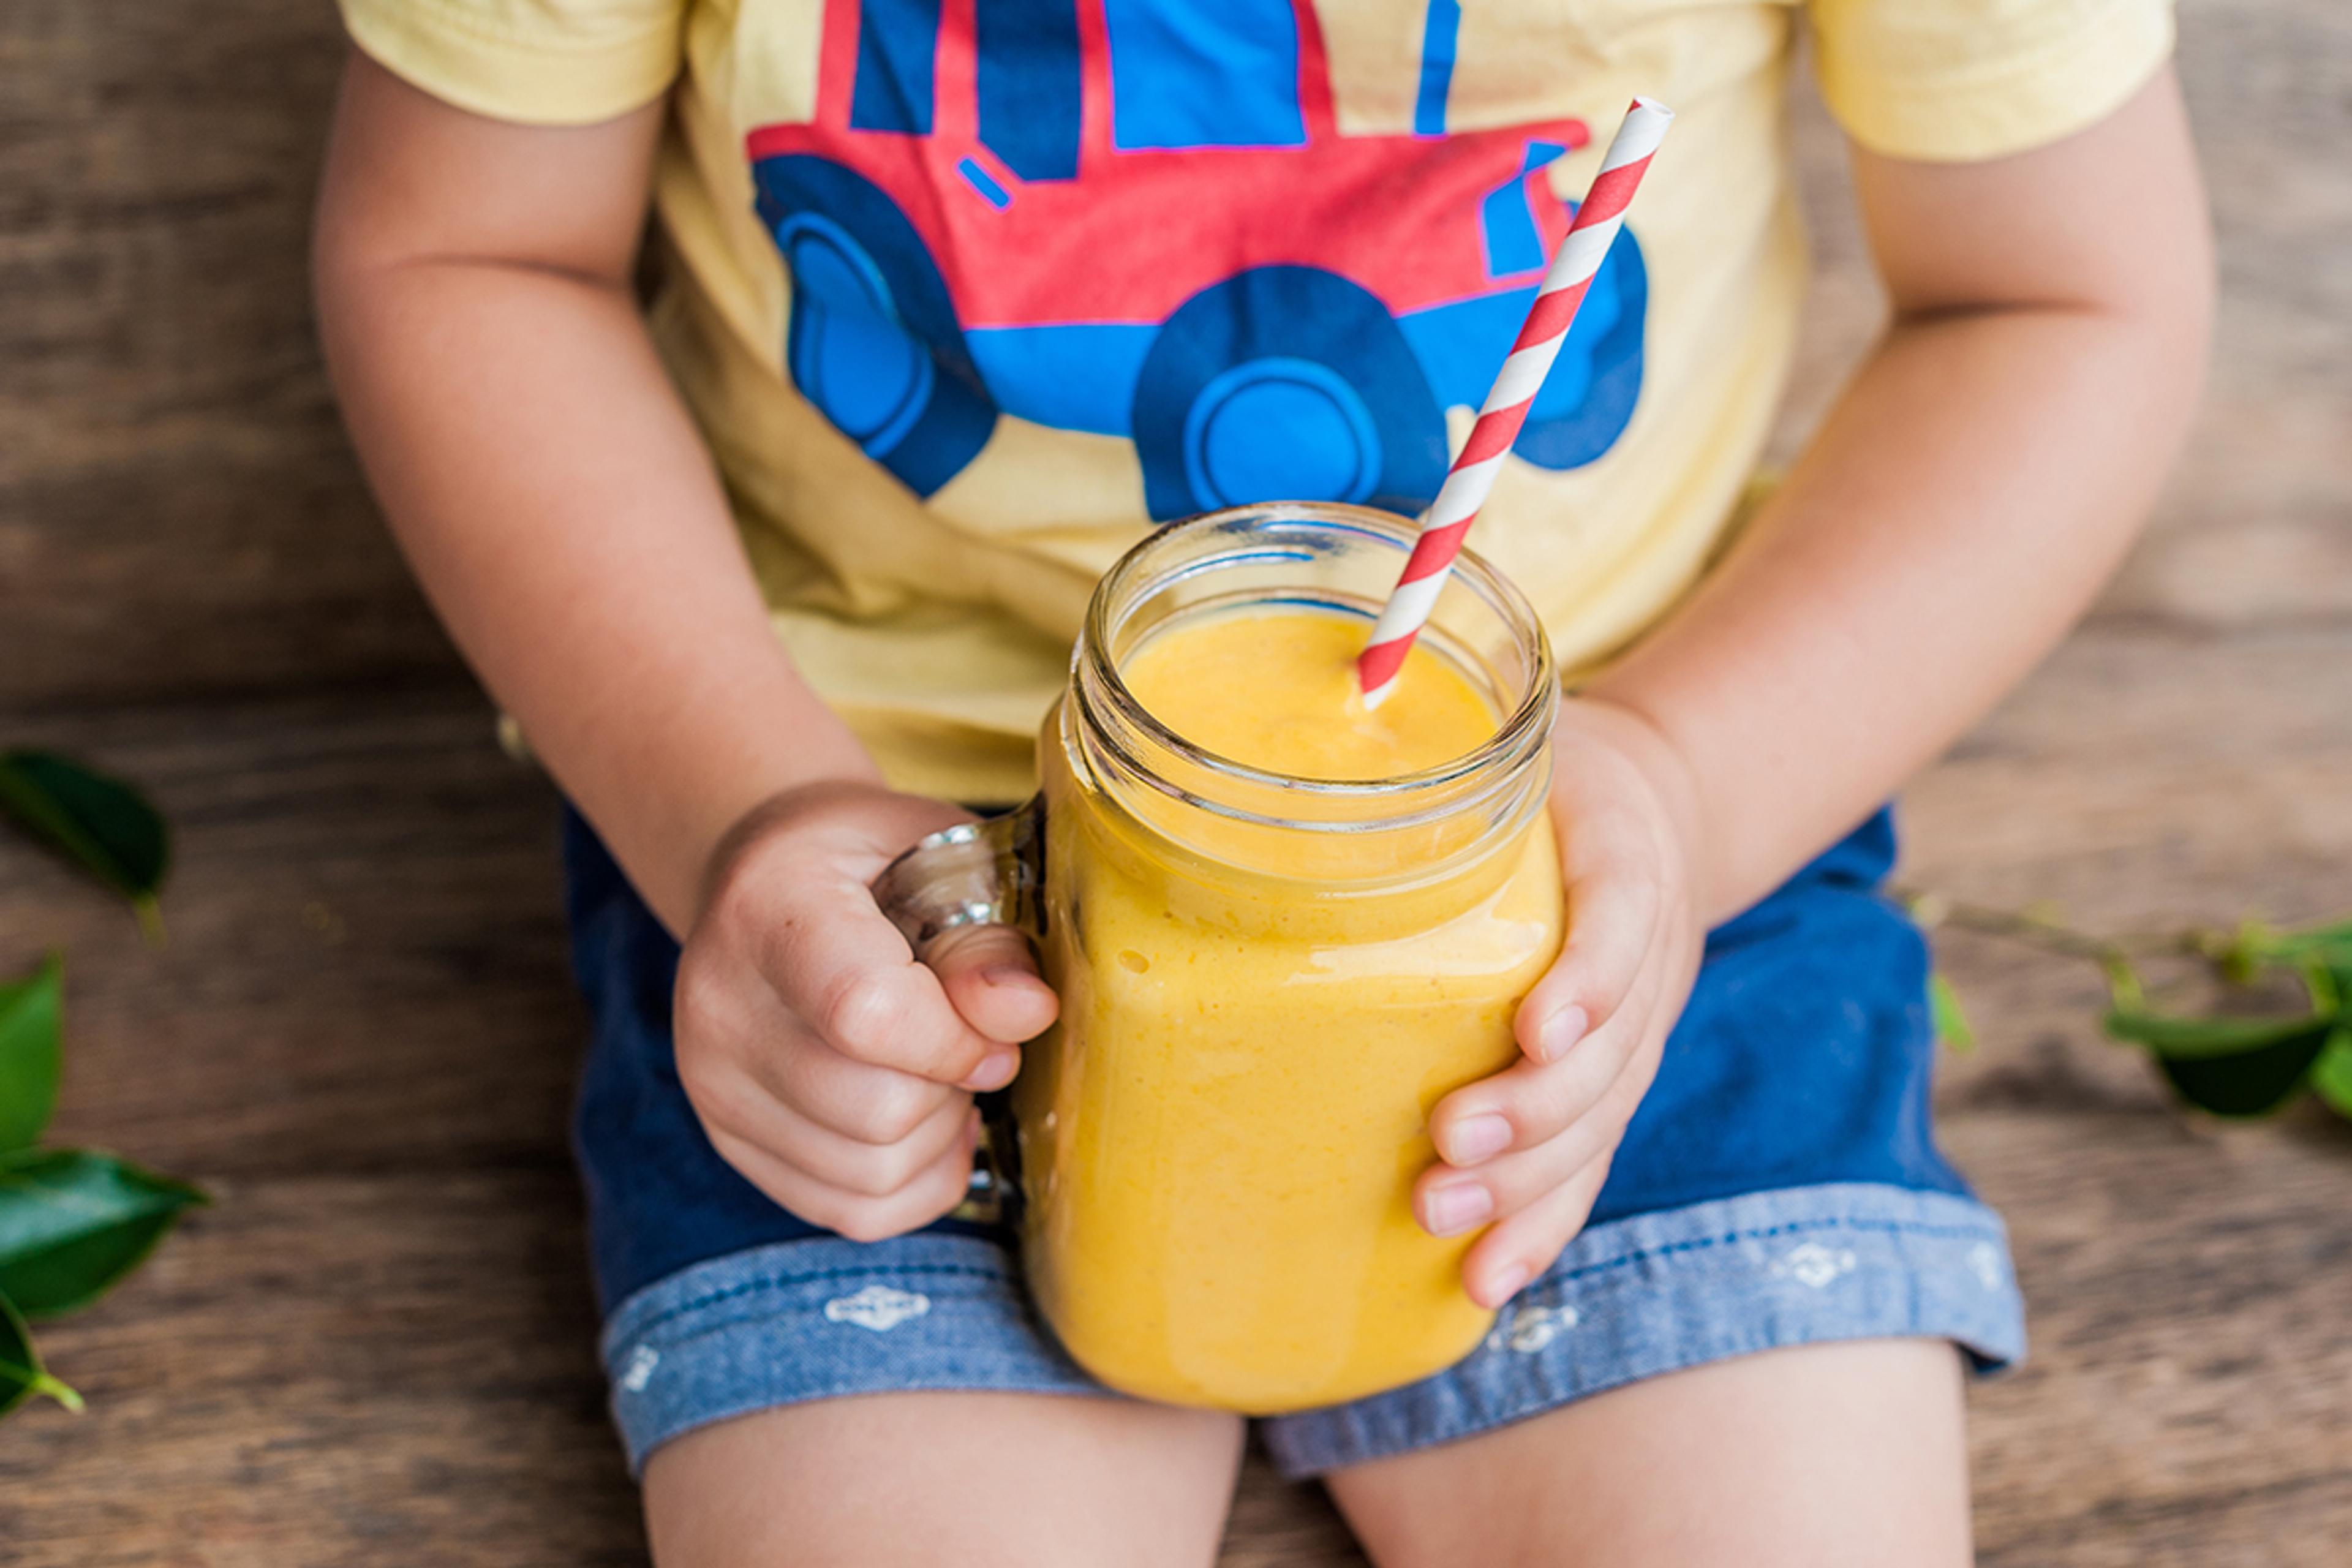 A child holds a cup containing a bright yellow smoothie with a red and white striped straw.